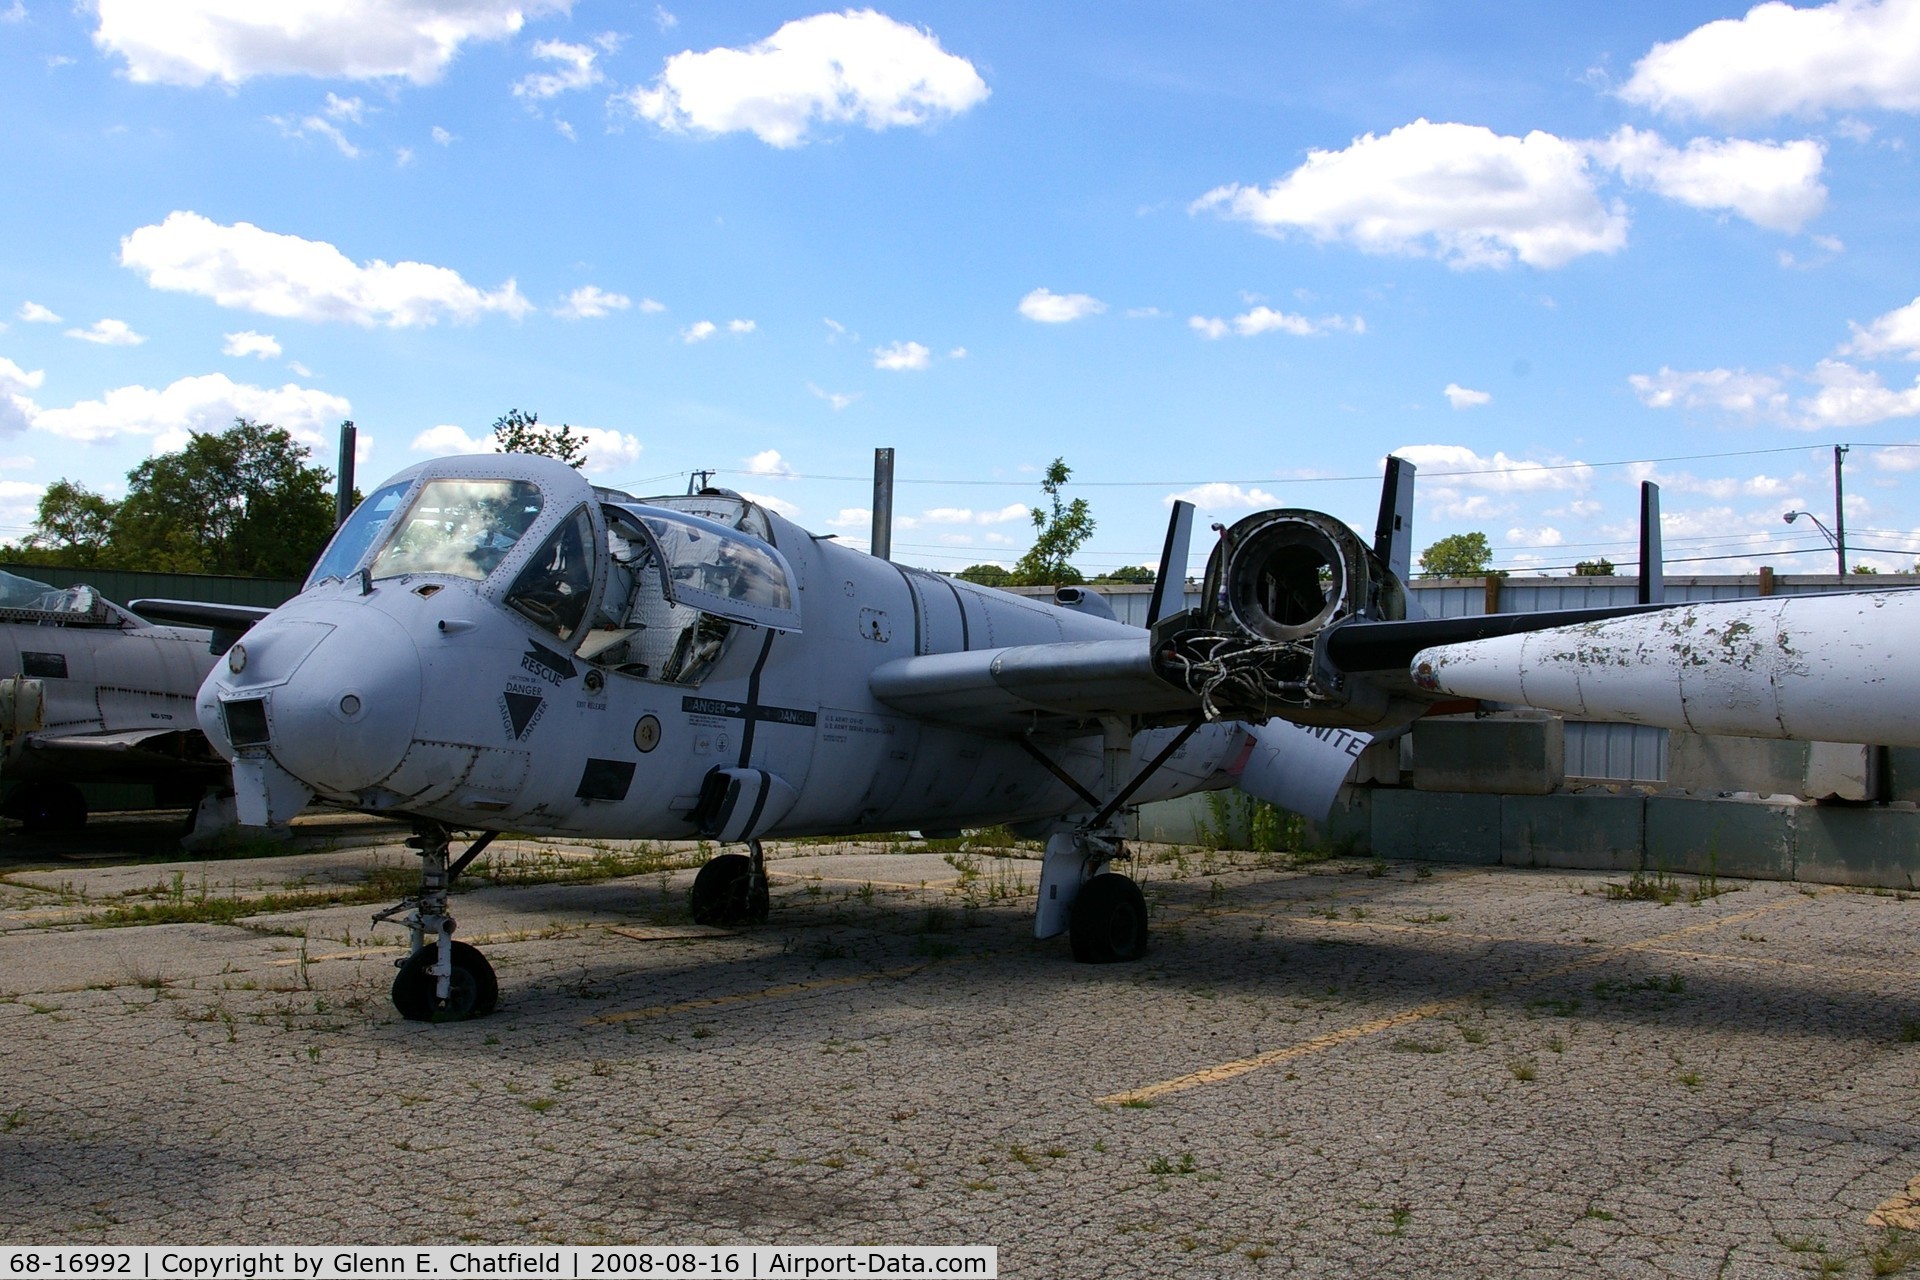 68-16992, 1968 Grumman OV-1D Mohawk C/N 62D, Now at the Russell Military Museum, Russell, IL